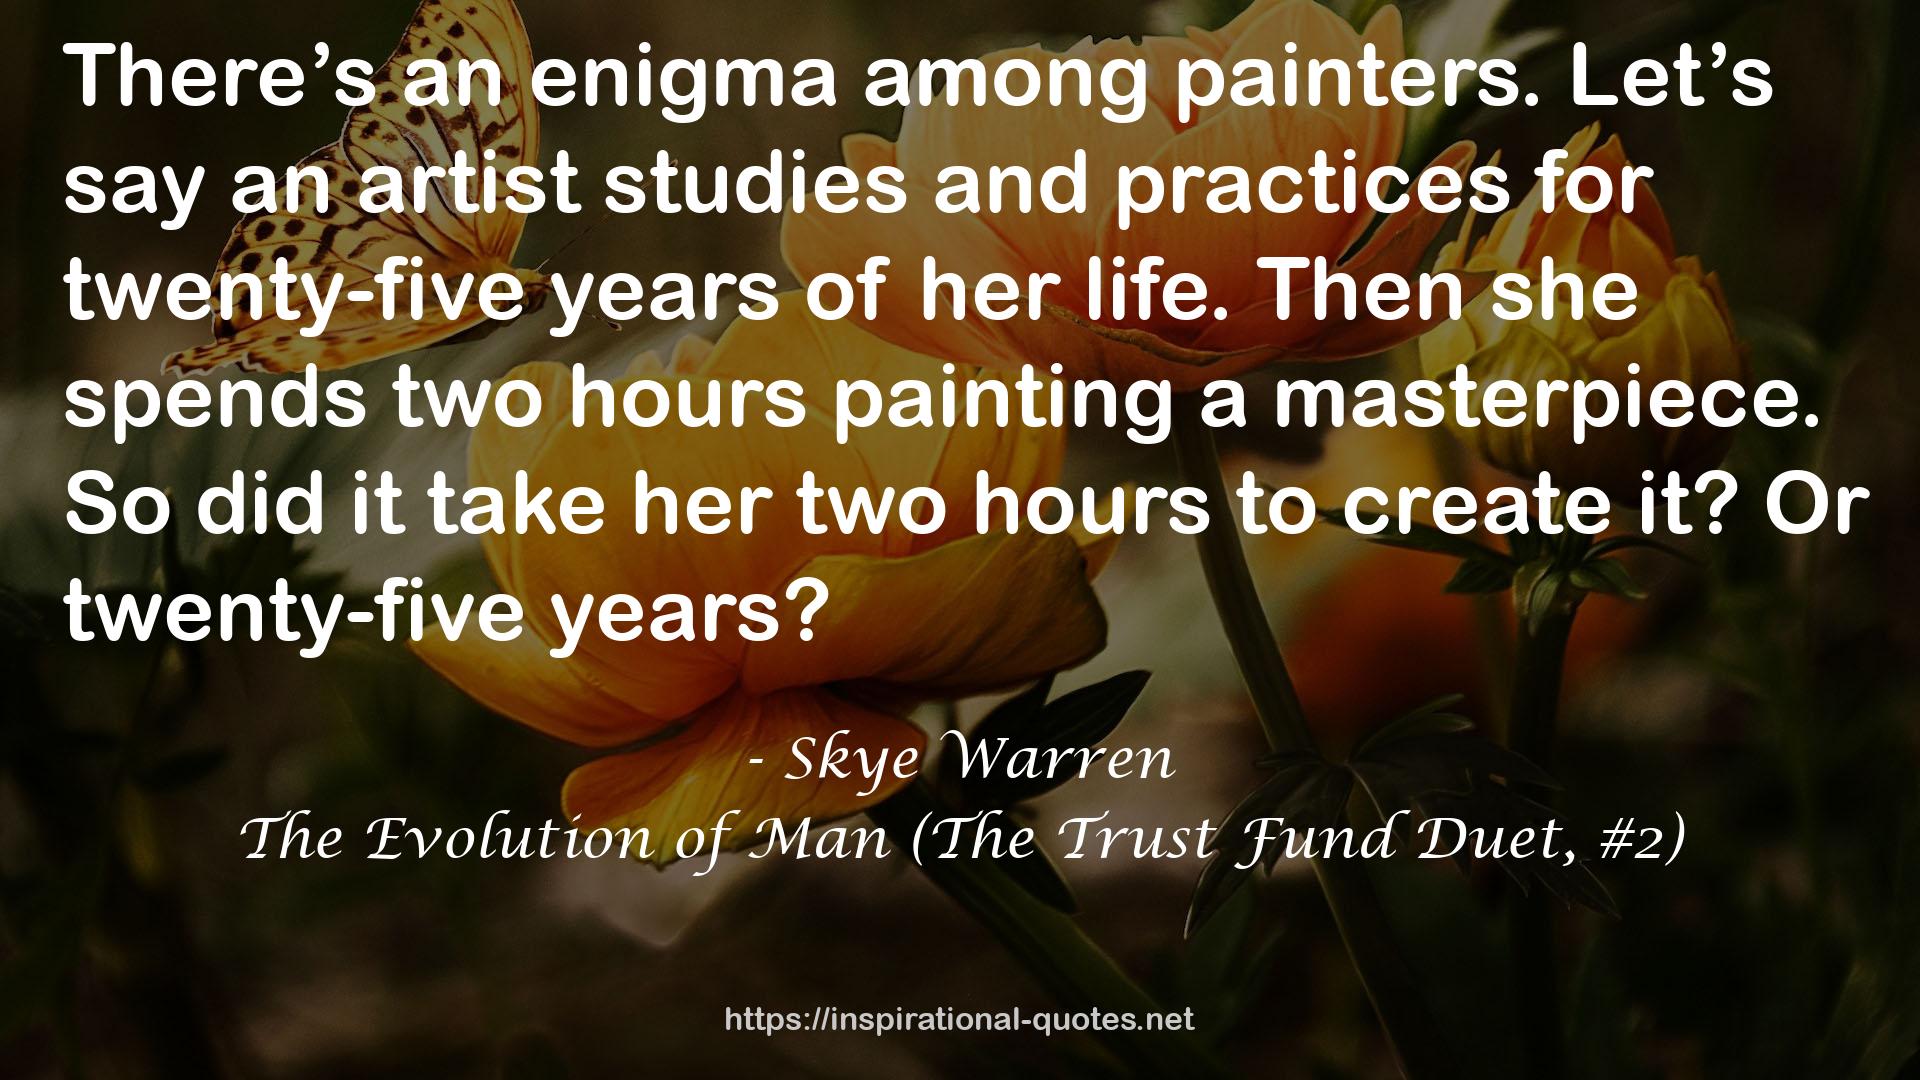 The Evolution of Man (The Trust Fund Duet, #2) QUOTES